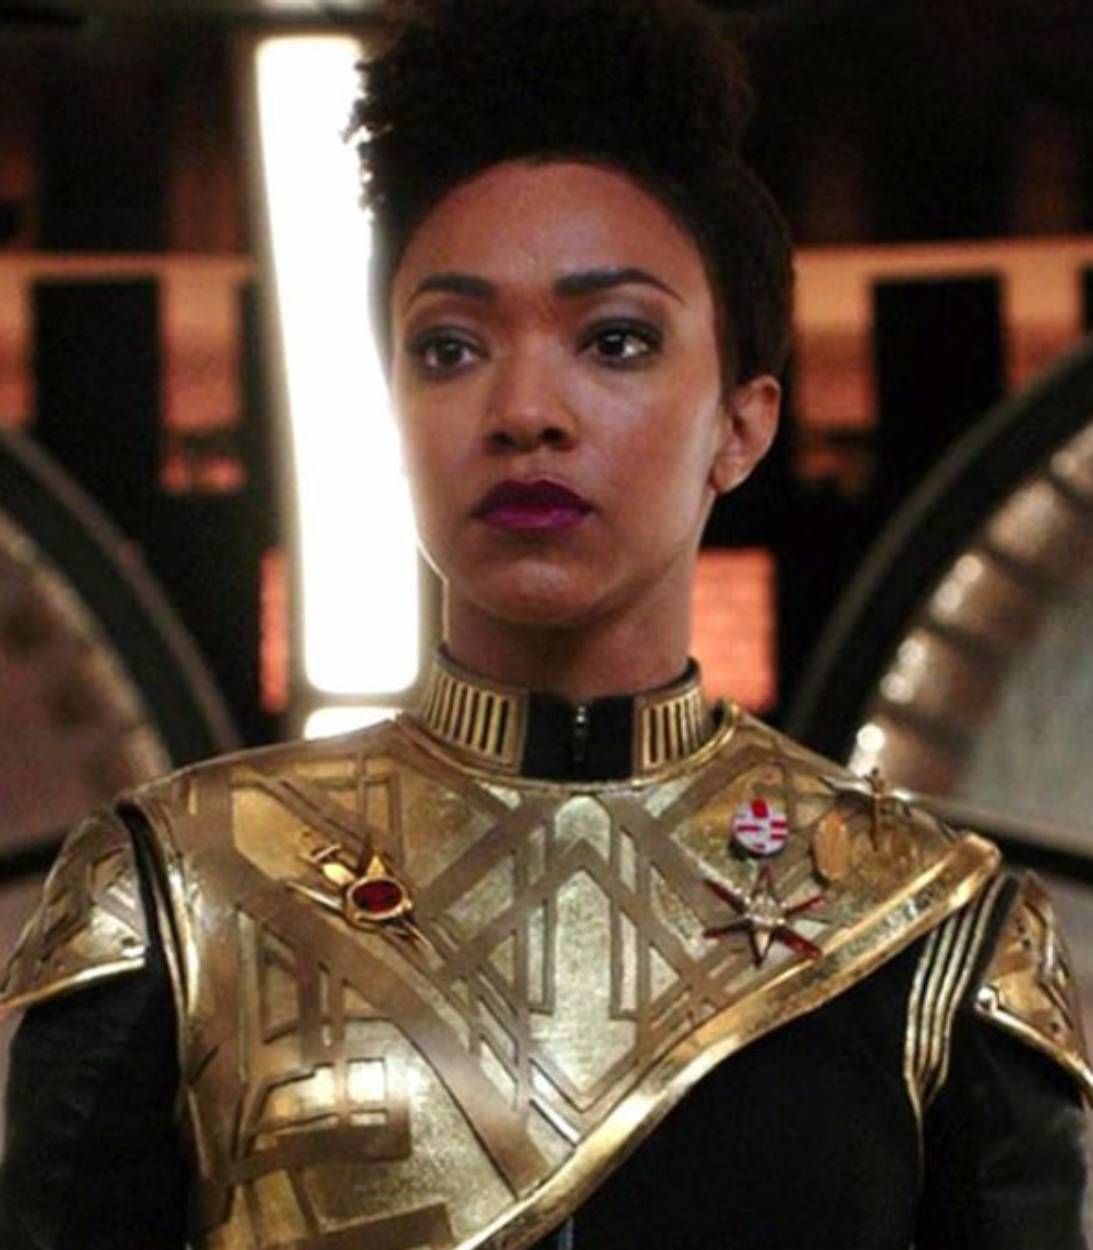 Star Trek Discovery Mirror Universe image pic vertical